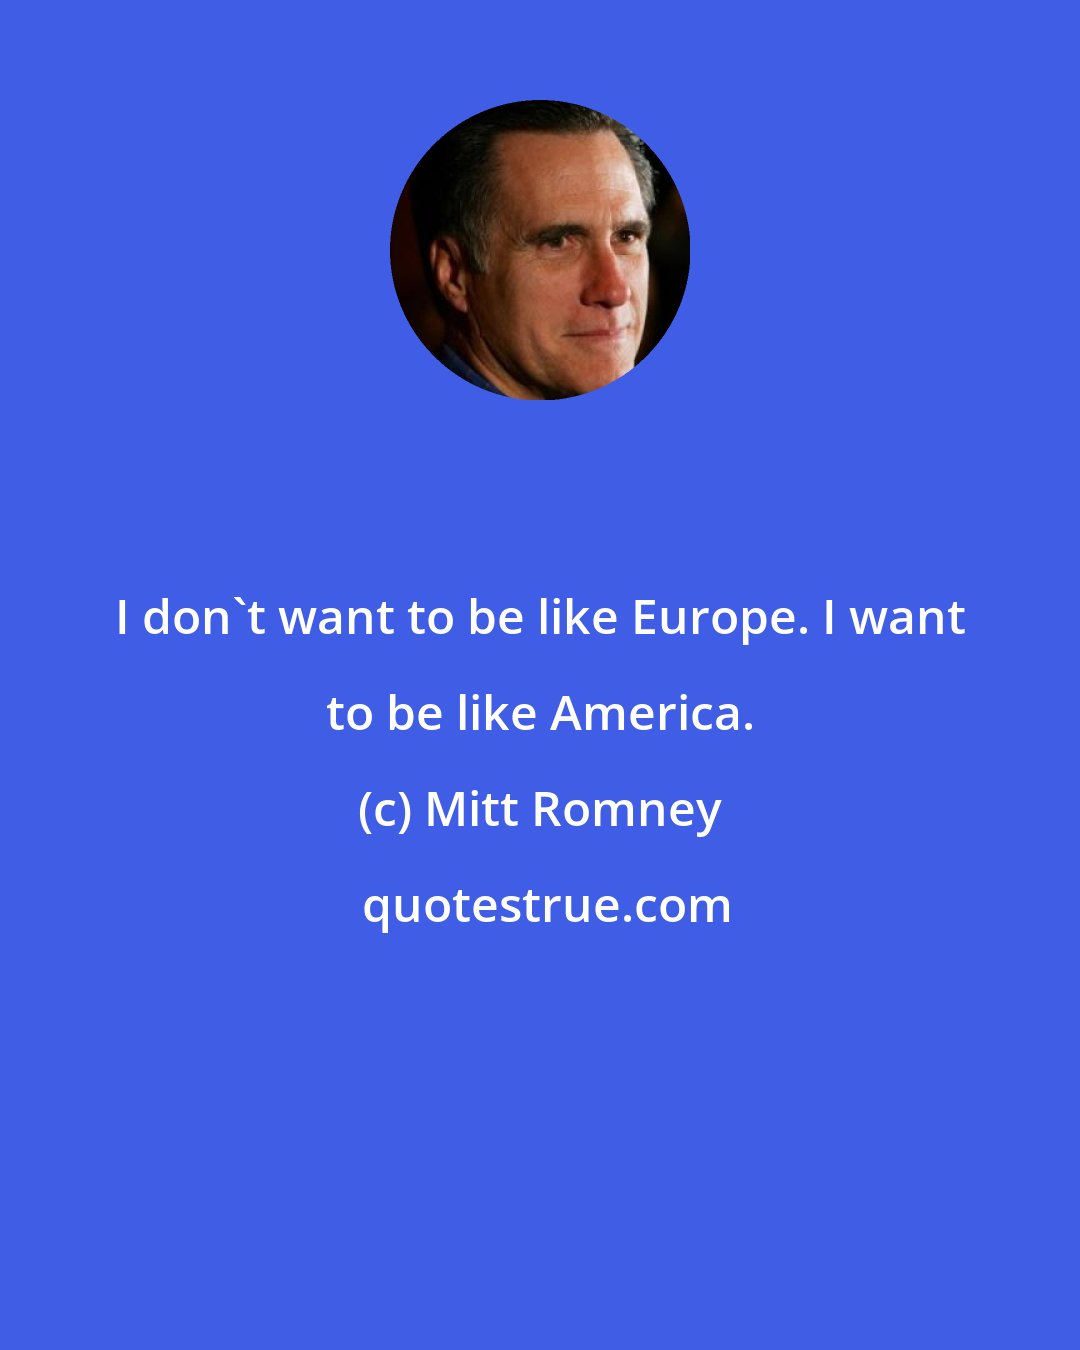 Mitt Romney: I don't want to be like Europe. I want to be like America.